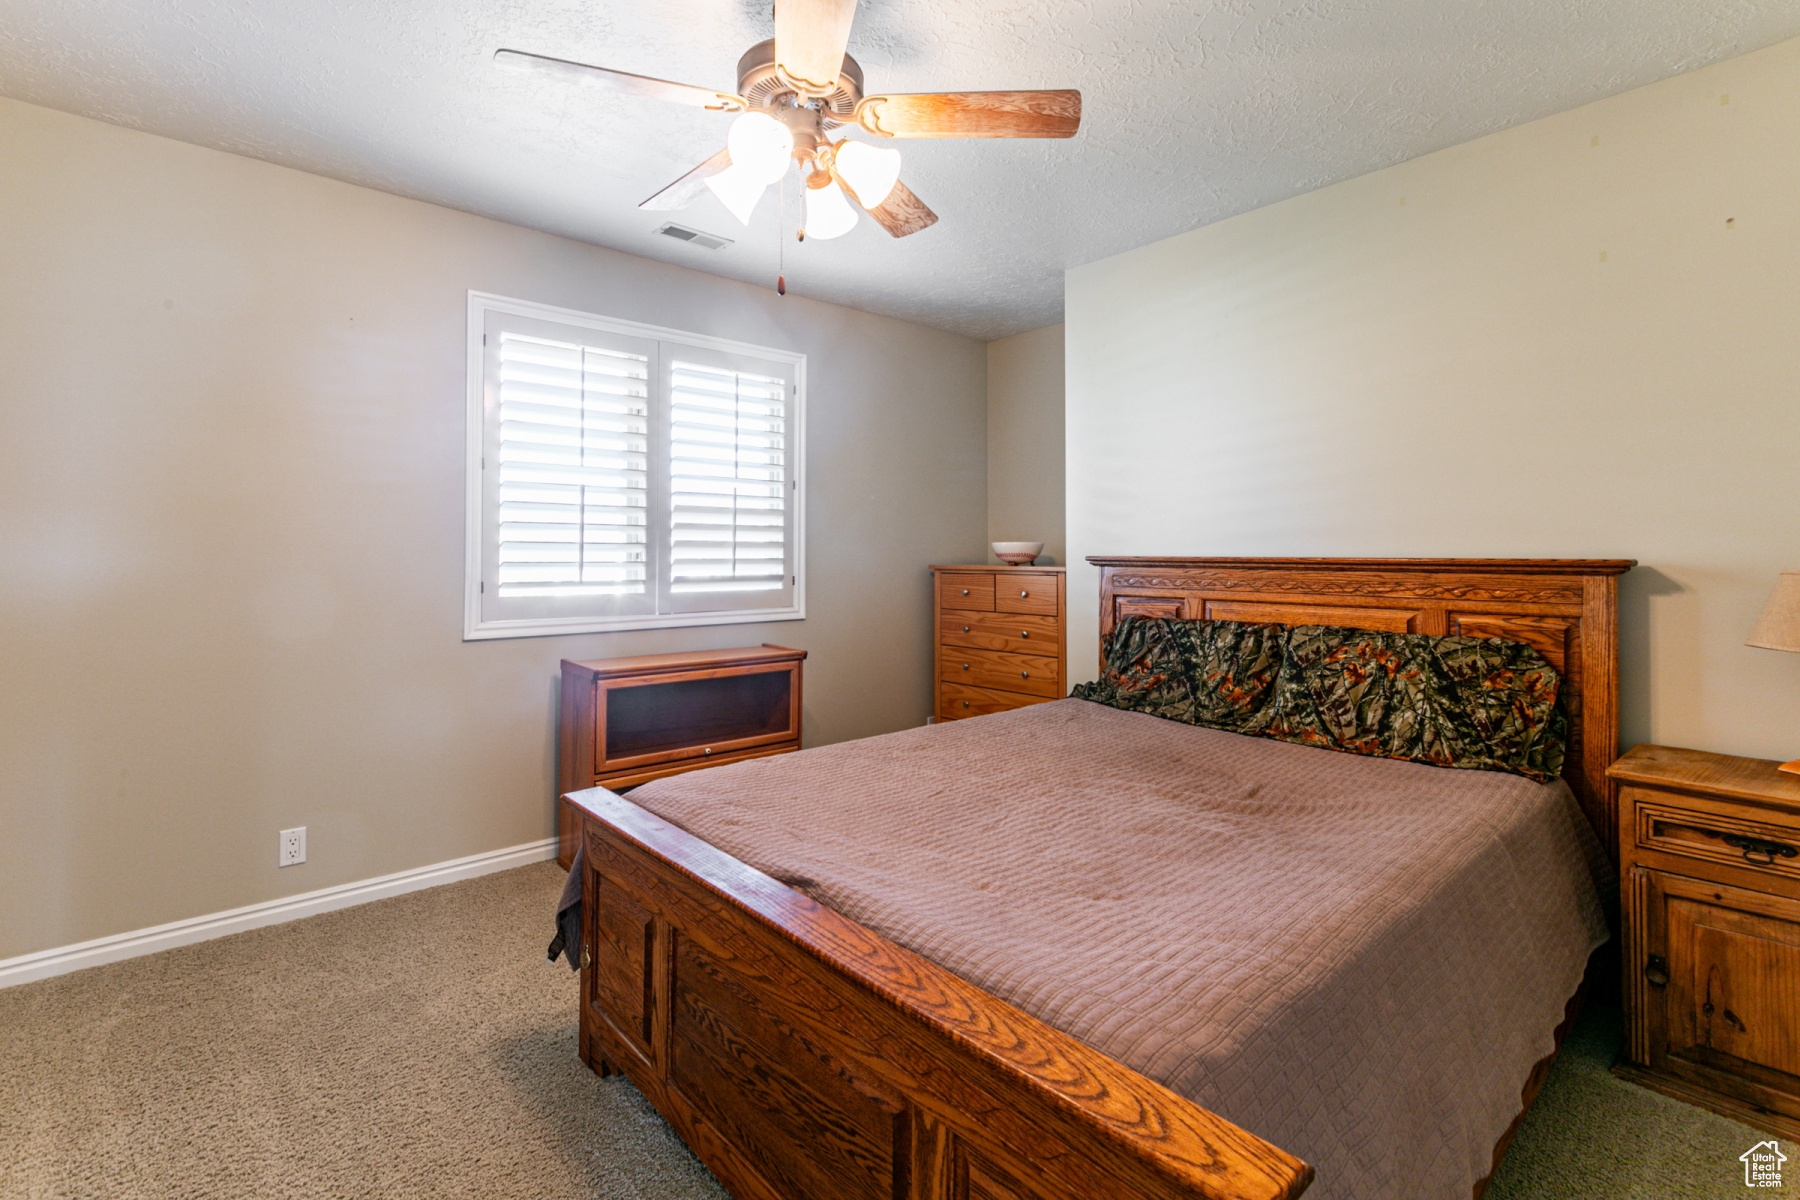 Bedroom featuring ceiling fan, carpet floors, and a textured ceiling